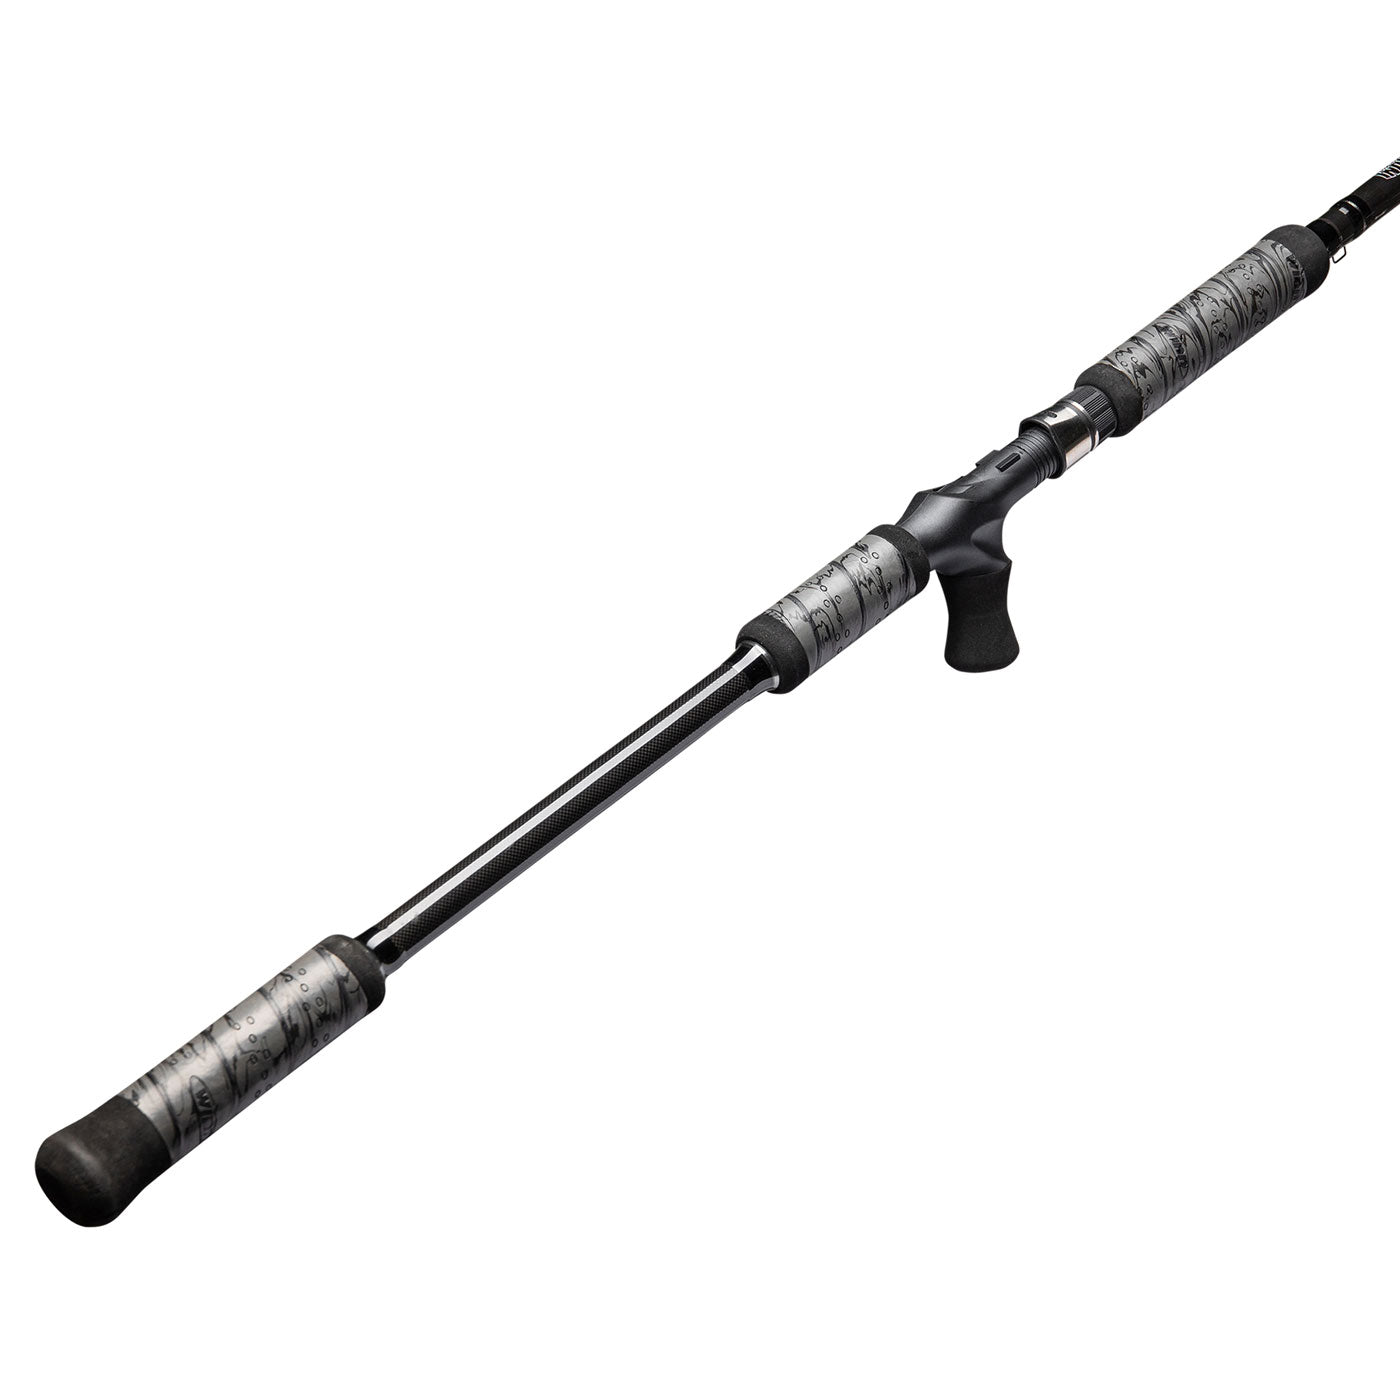 Shop Carp and Specimen Fishing Rods High Quality Brands Pike